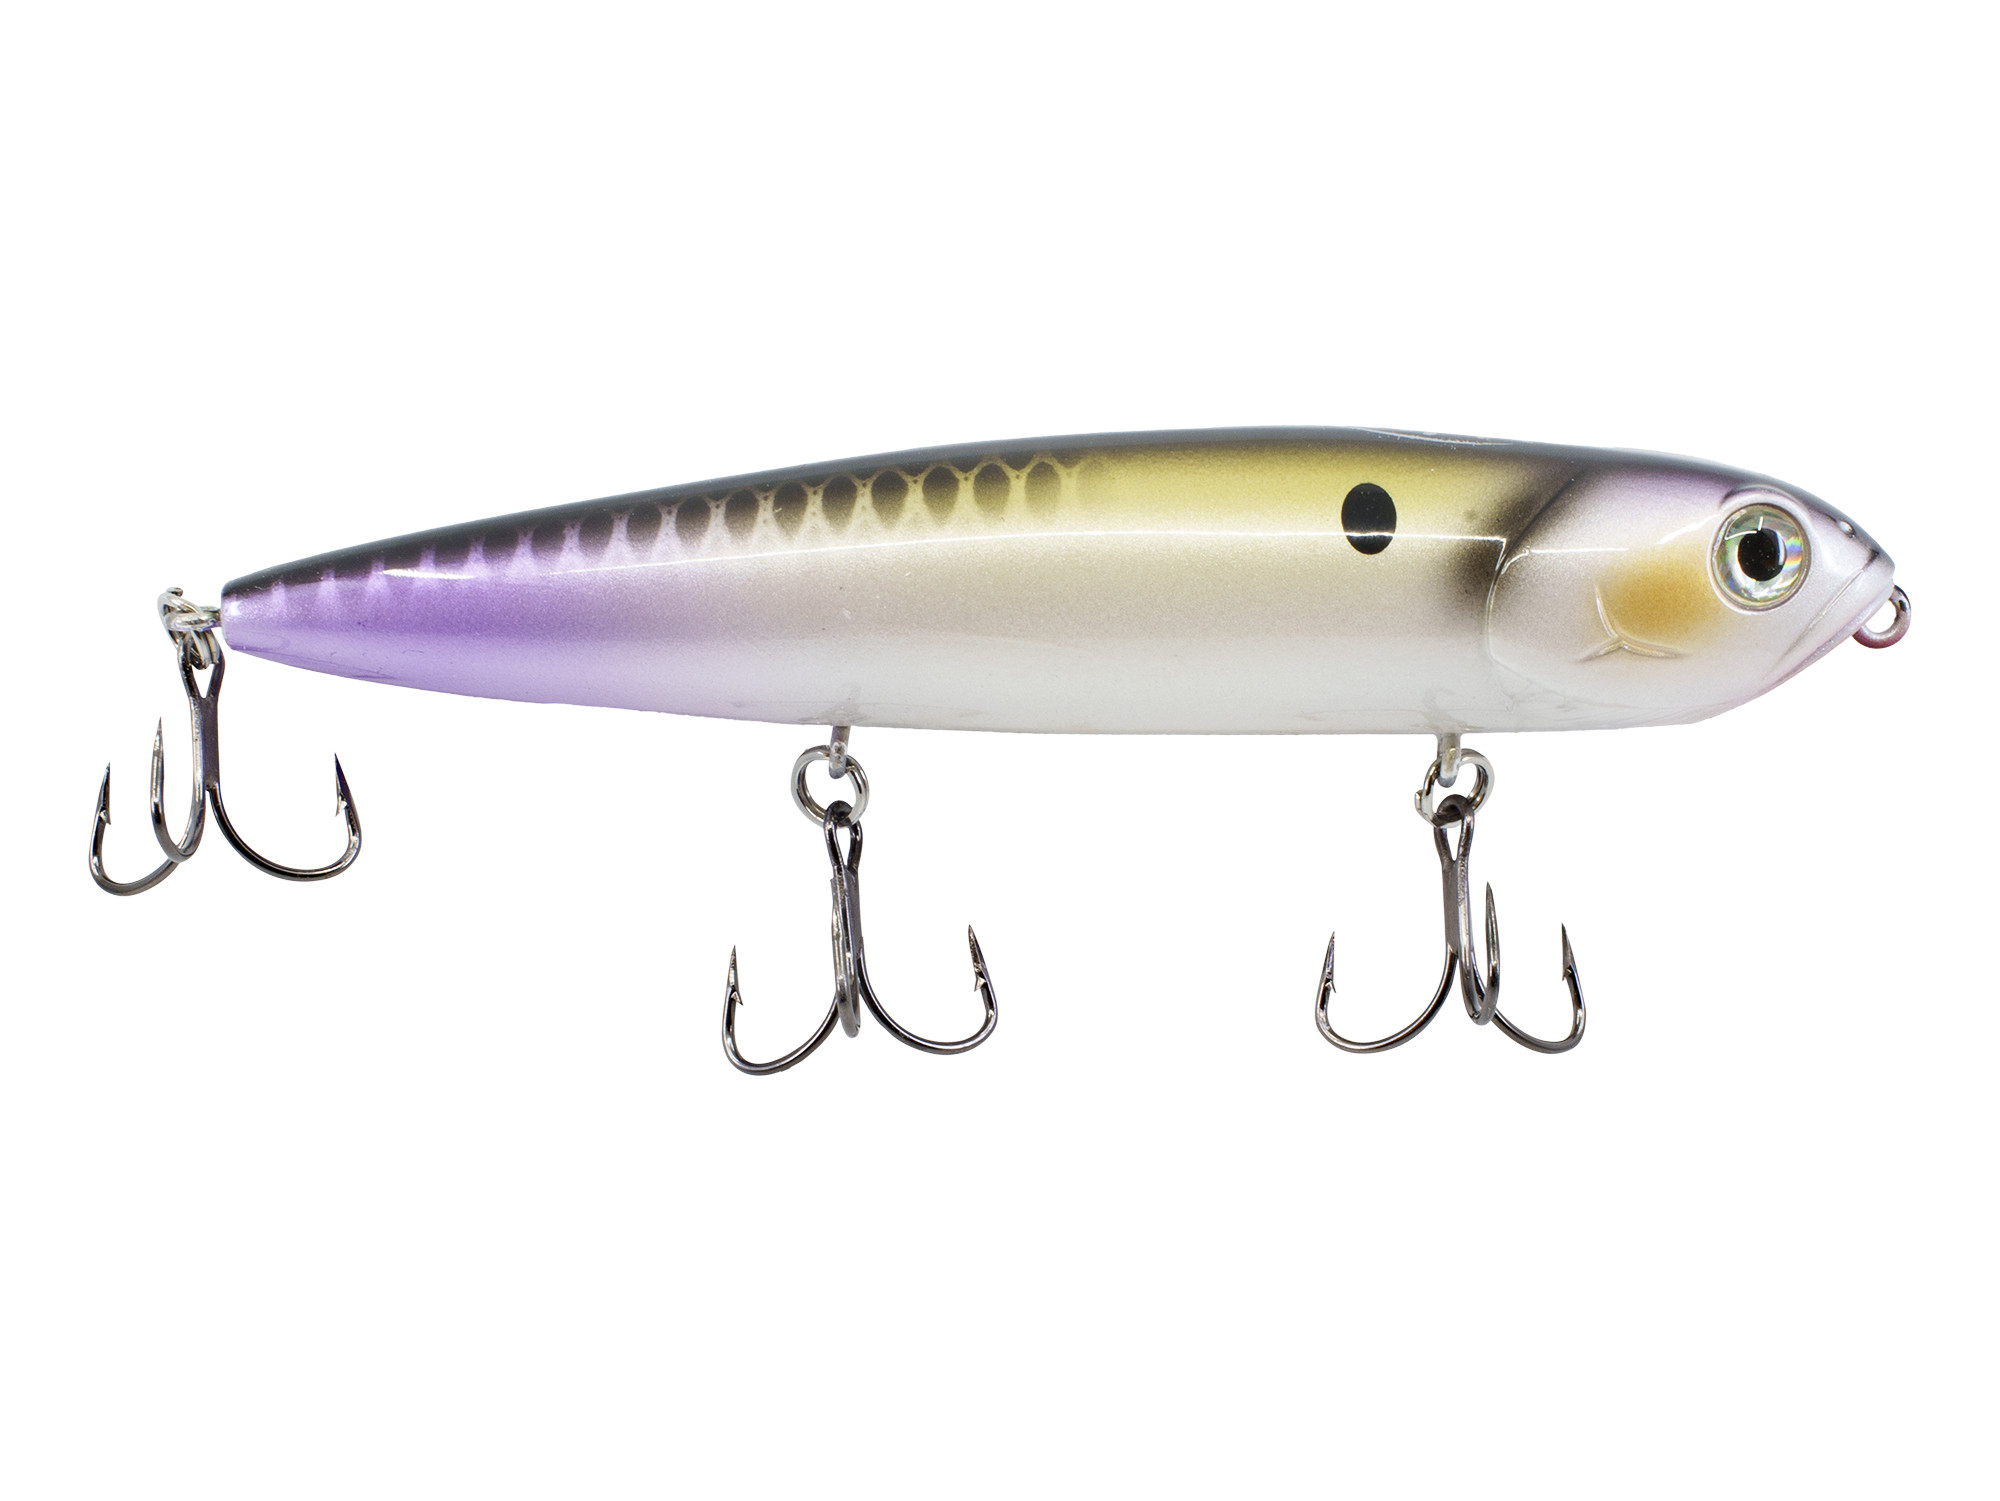 Holographic 120 Jerkbait Fishing Lure. Saltwater Fishing or Freshwater  Fishing. Blue Shad, Green Shad or Natural Shad. 